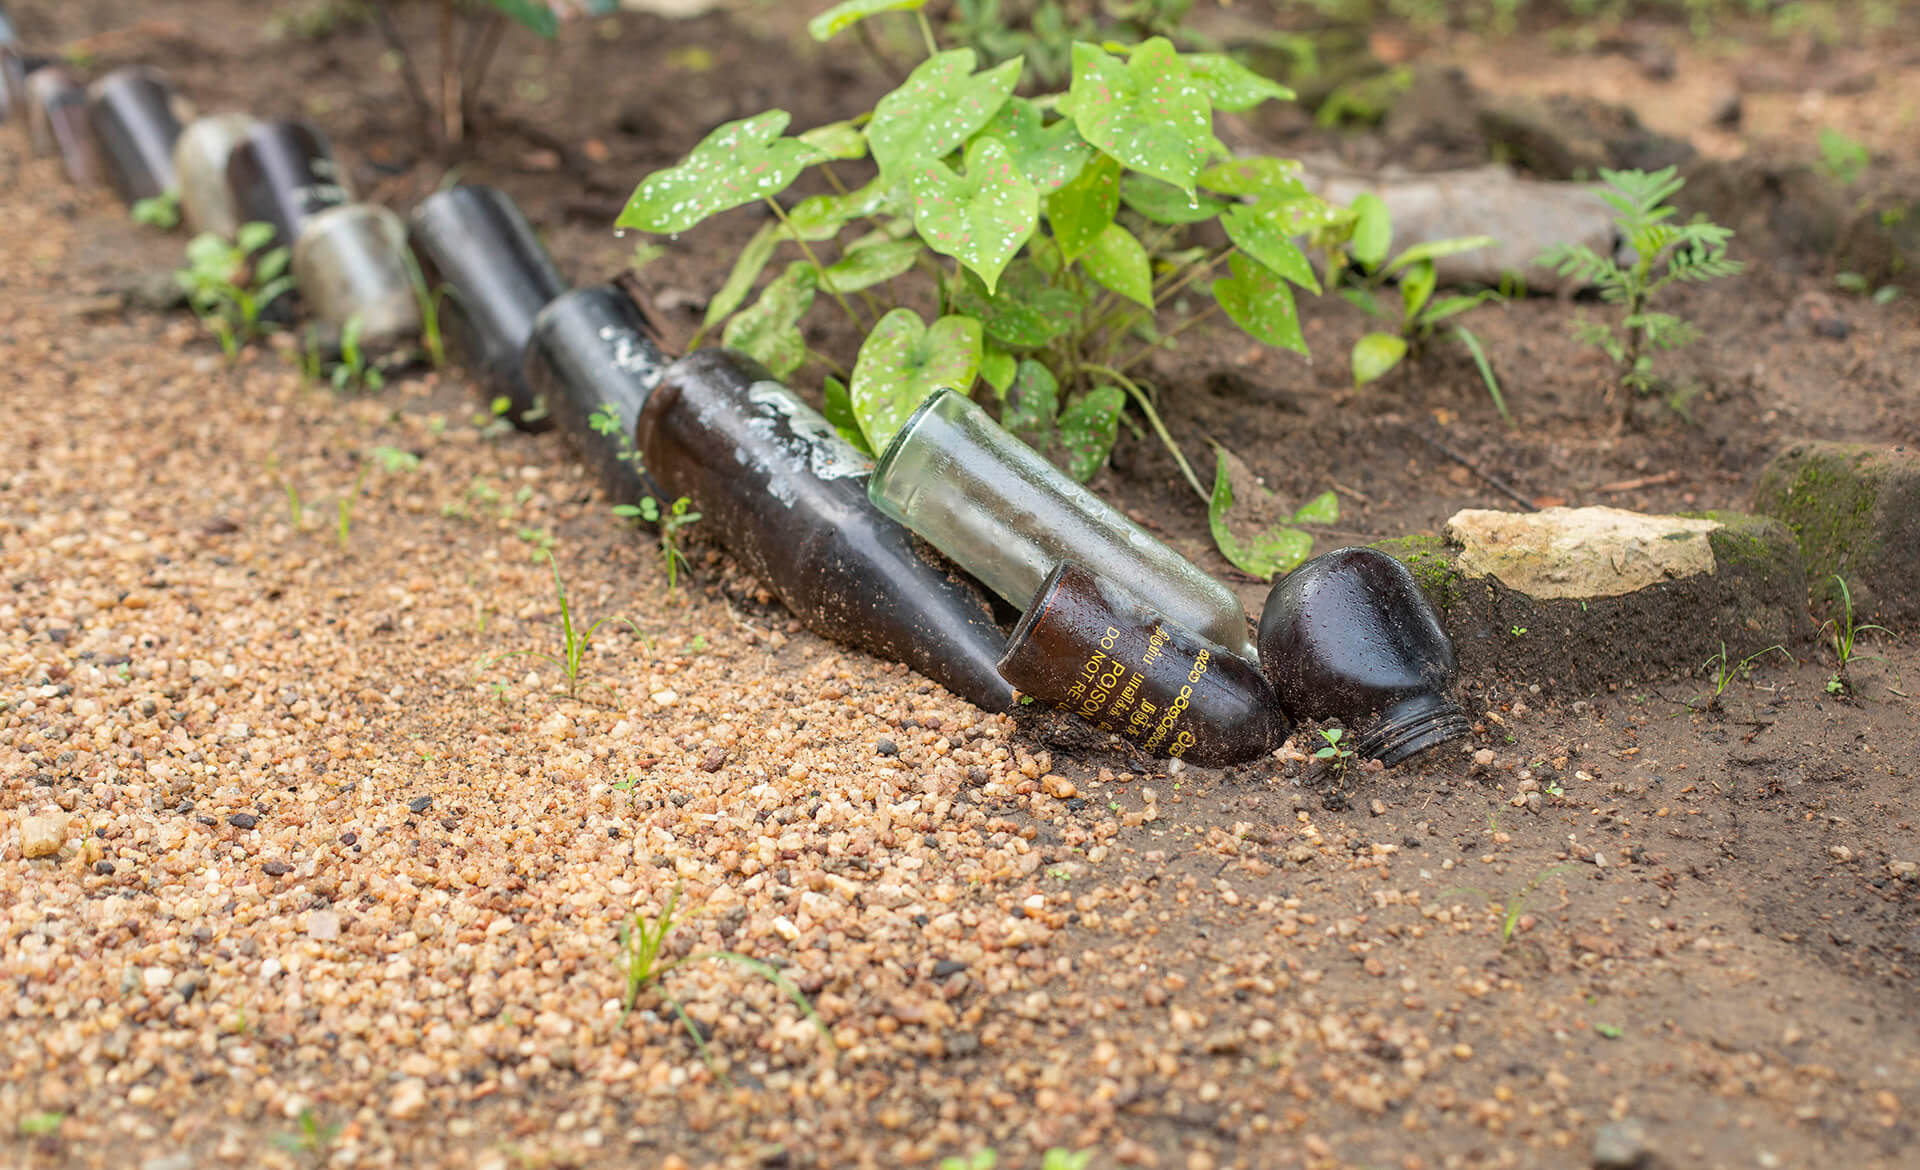 Upturned bottles in soil one showing label with 'Poison'